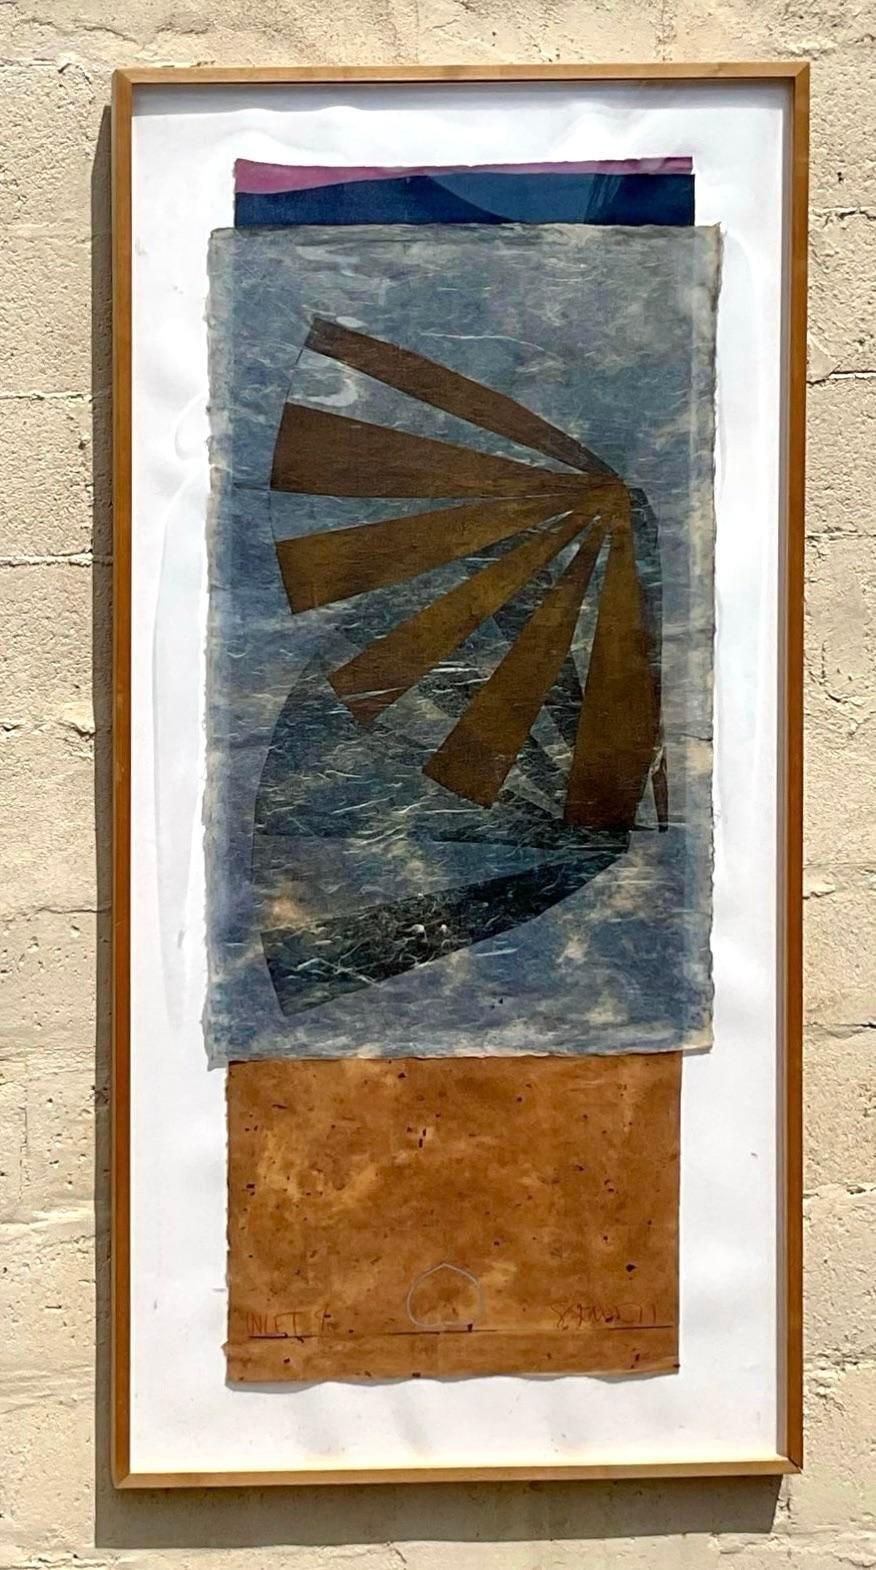 Original signed and numbered monumental, mixed media art piece. Scott Sandell likely created this piece in the 70s or 80s. Sandell is known for this type of work on Japon paper. Sandell often shows this technique with Japanese Kozo handmade paper